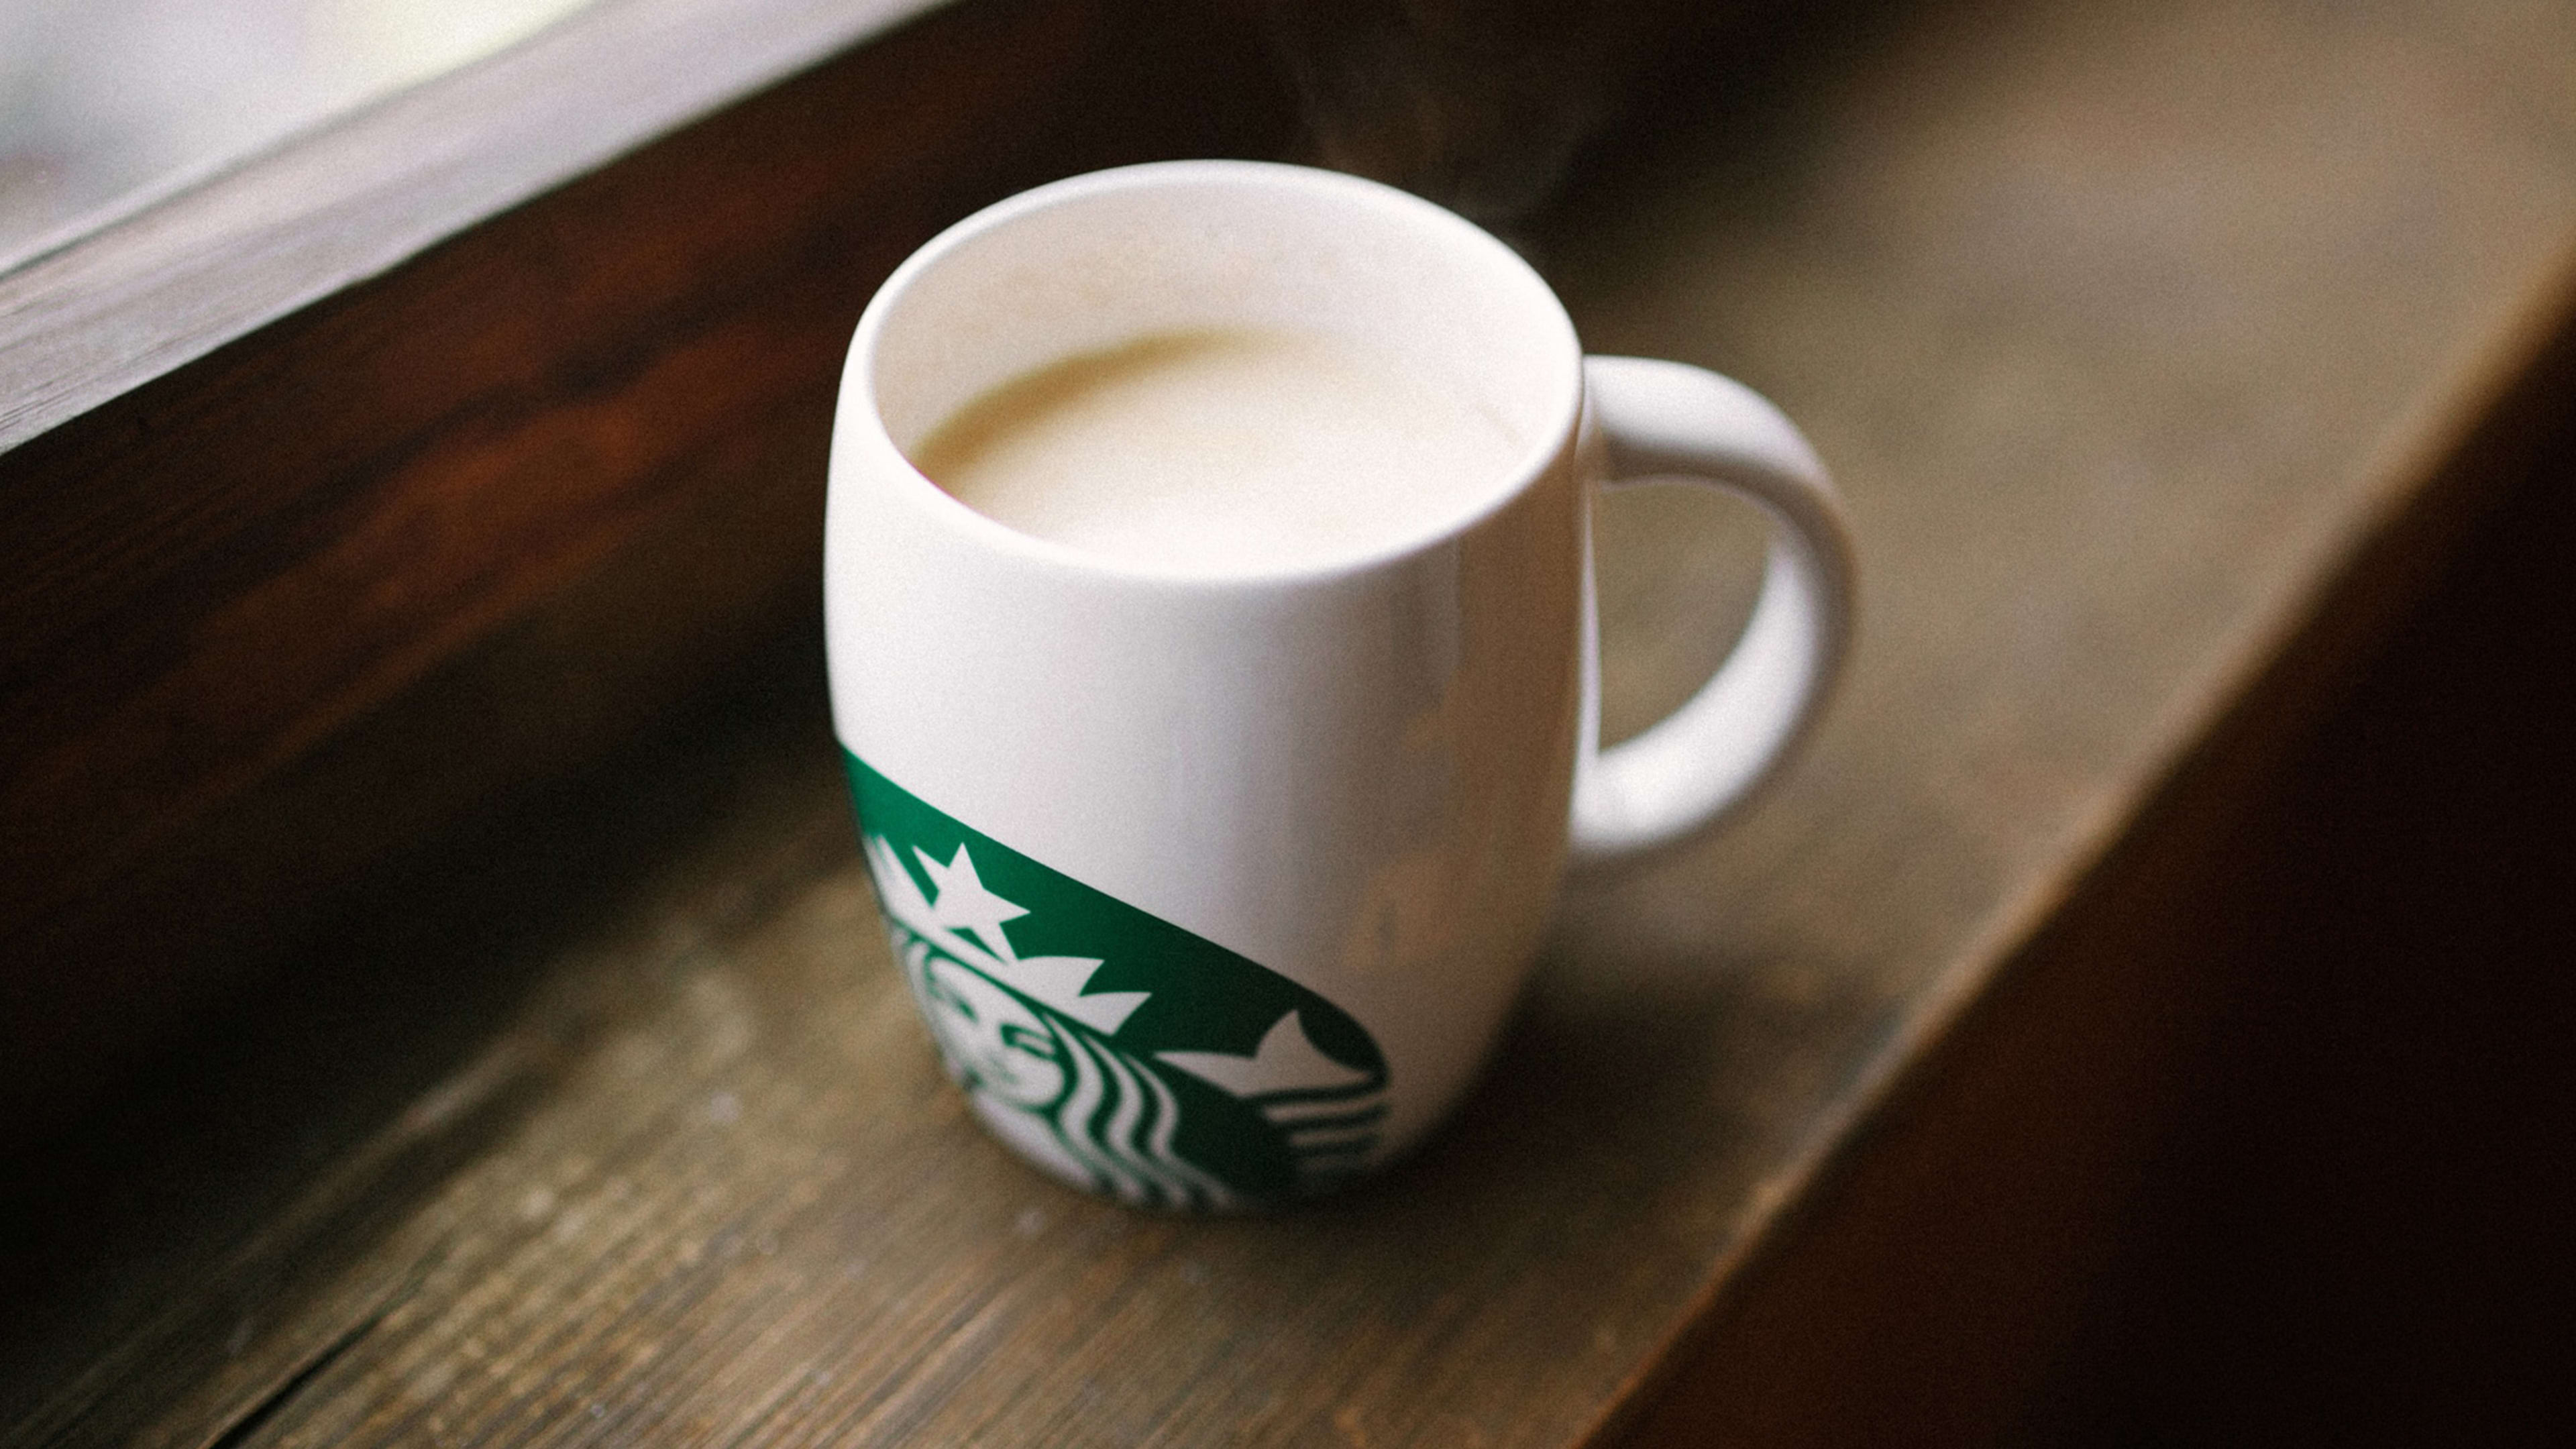 Starbucks is now aiming to become ‘resource-positive’—though it won’t say by when